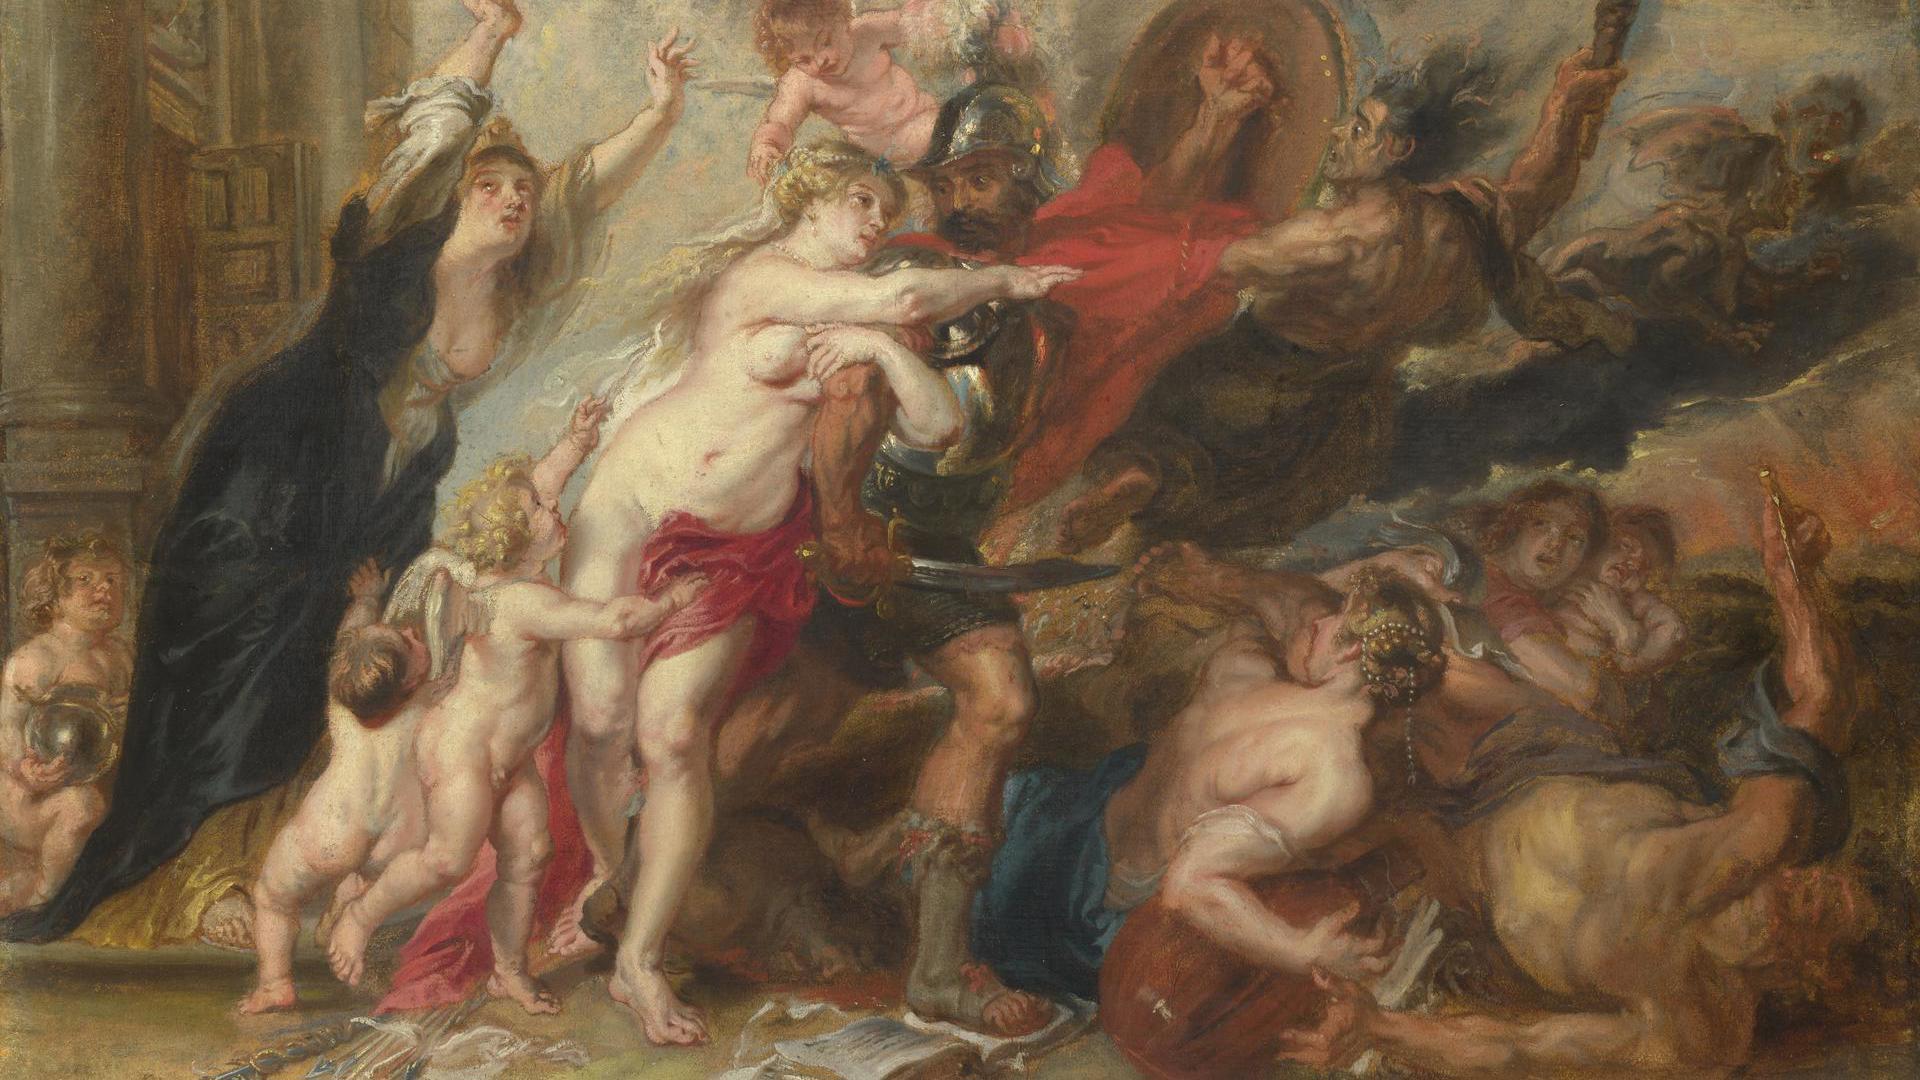 The Horrors of War by After Peter Paul Rubens